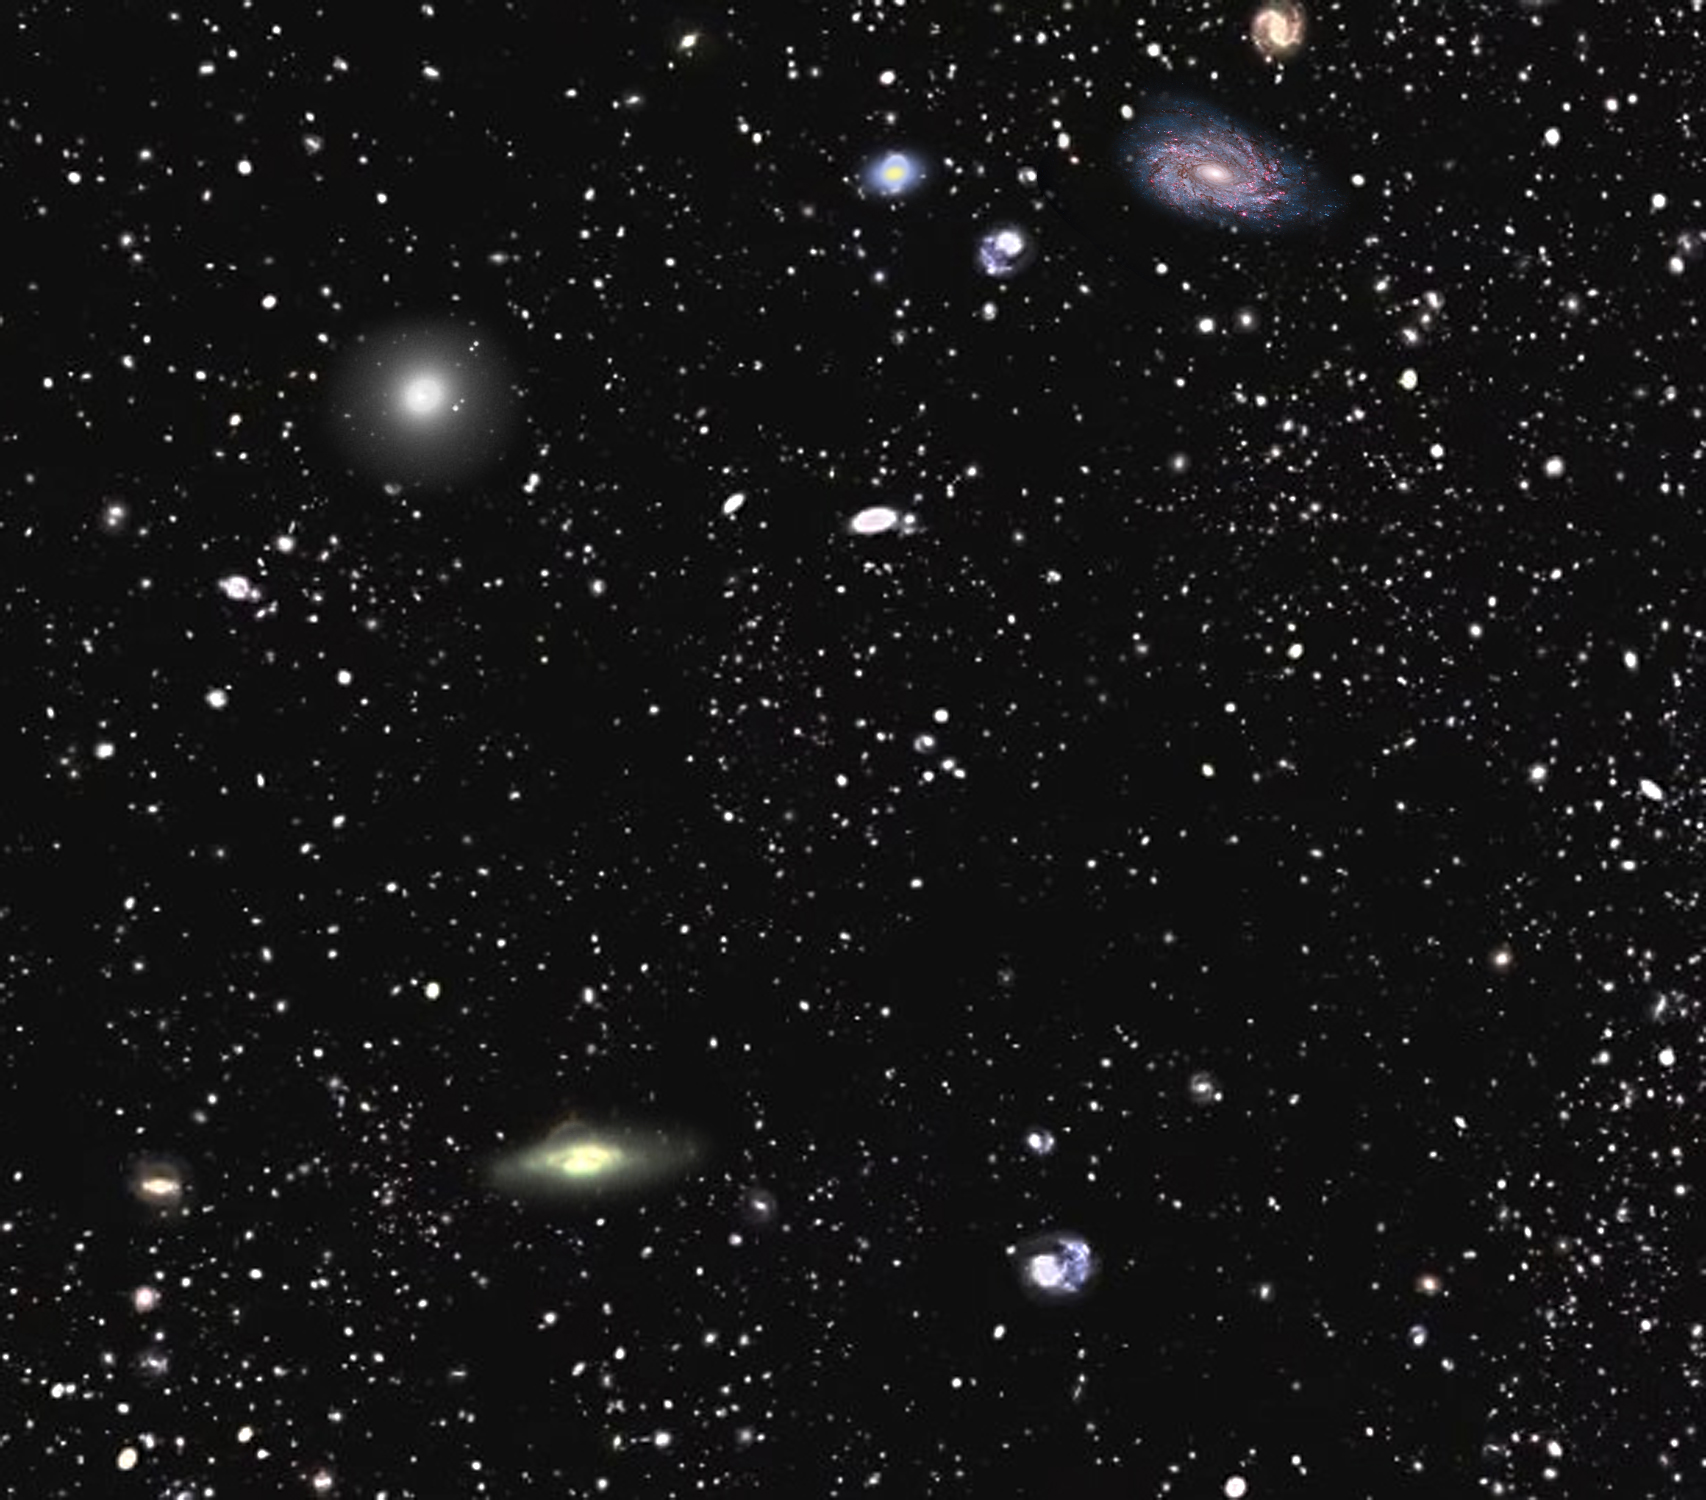 known galaxies map